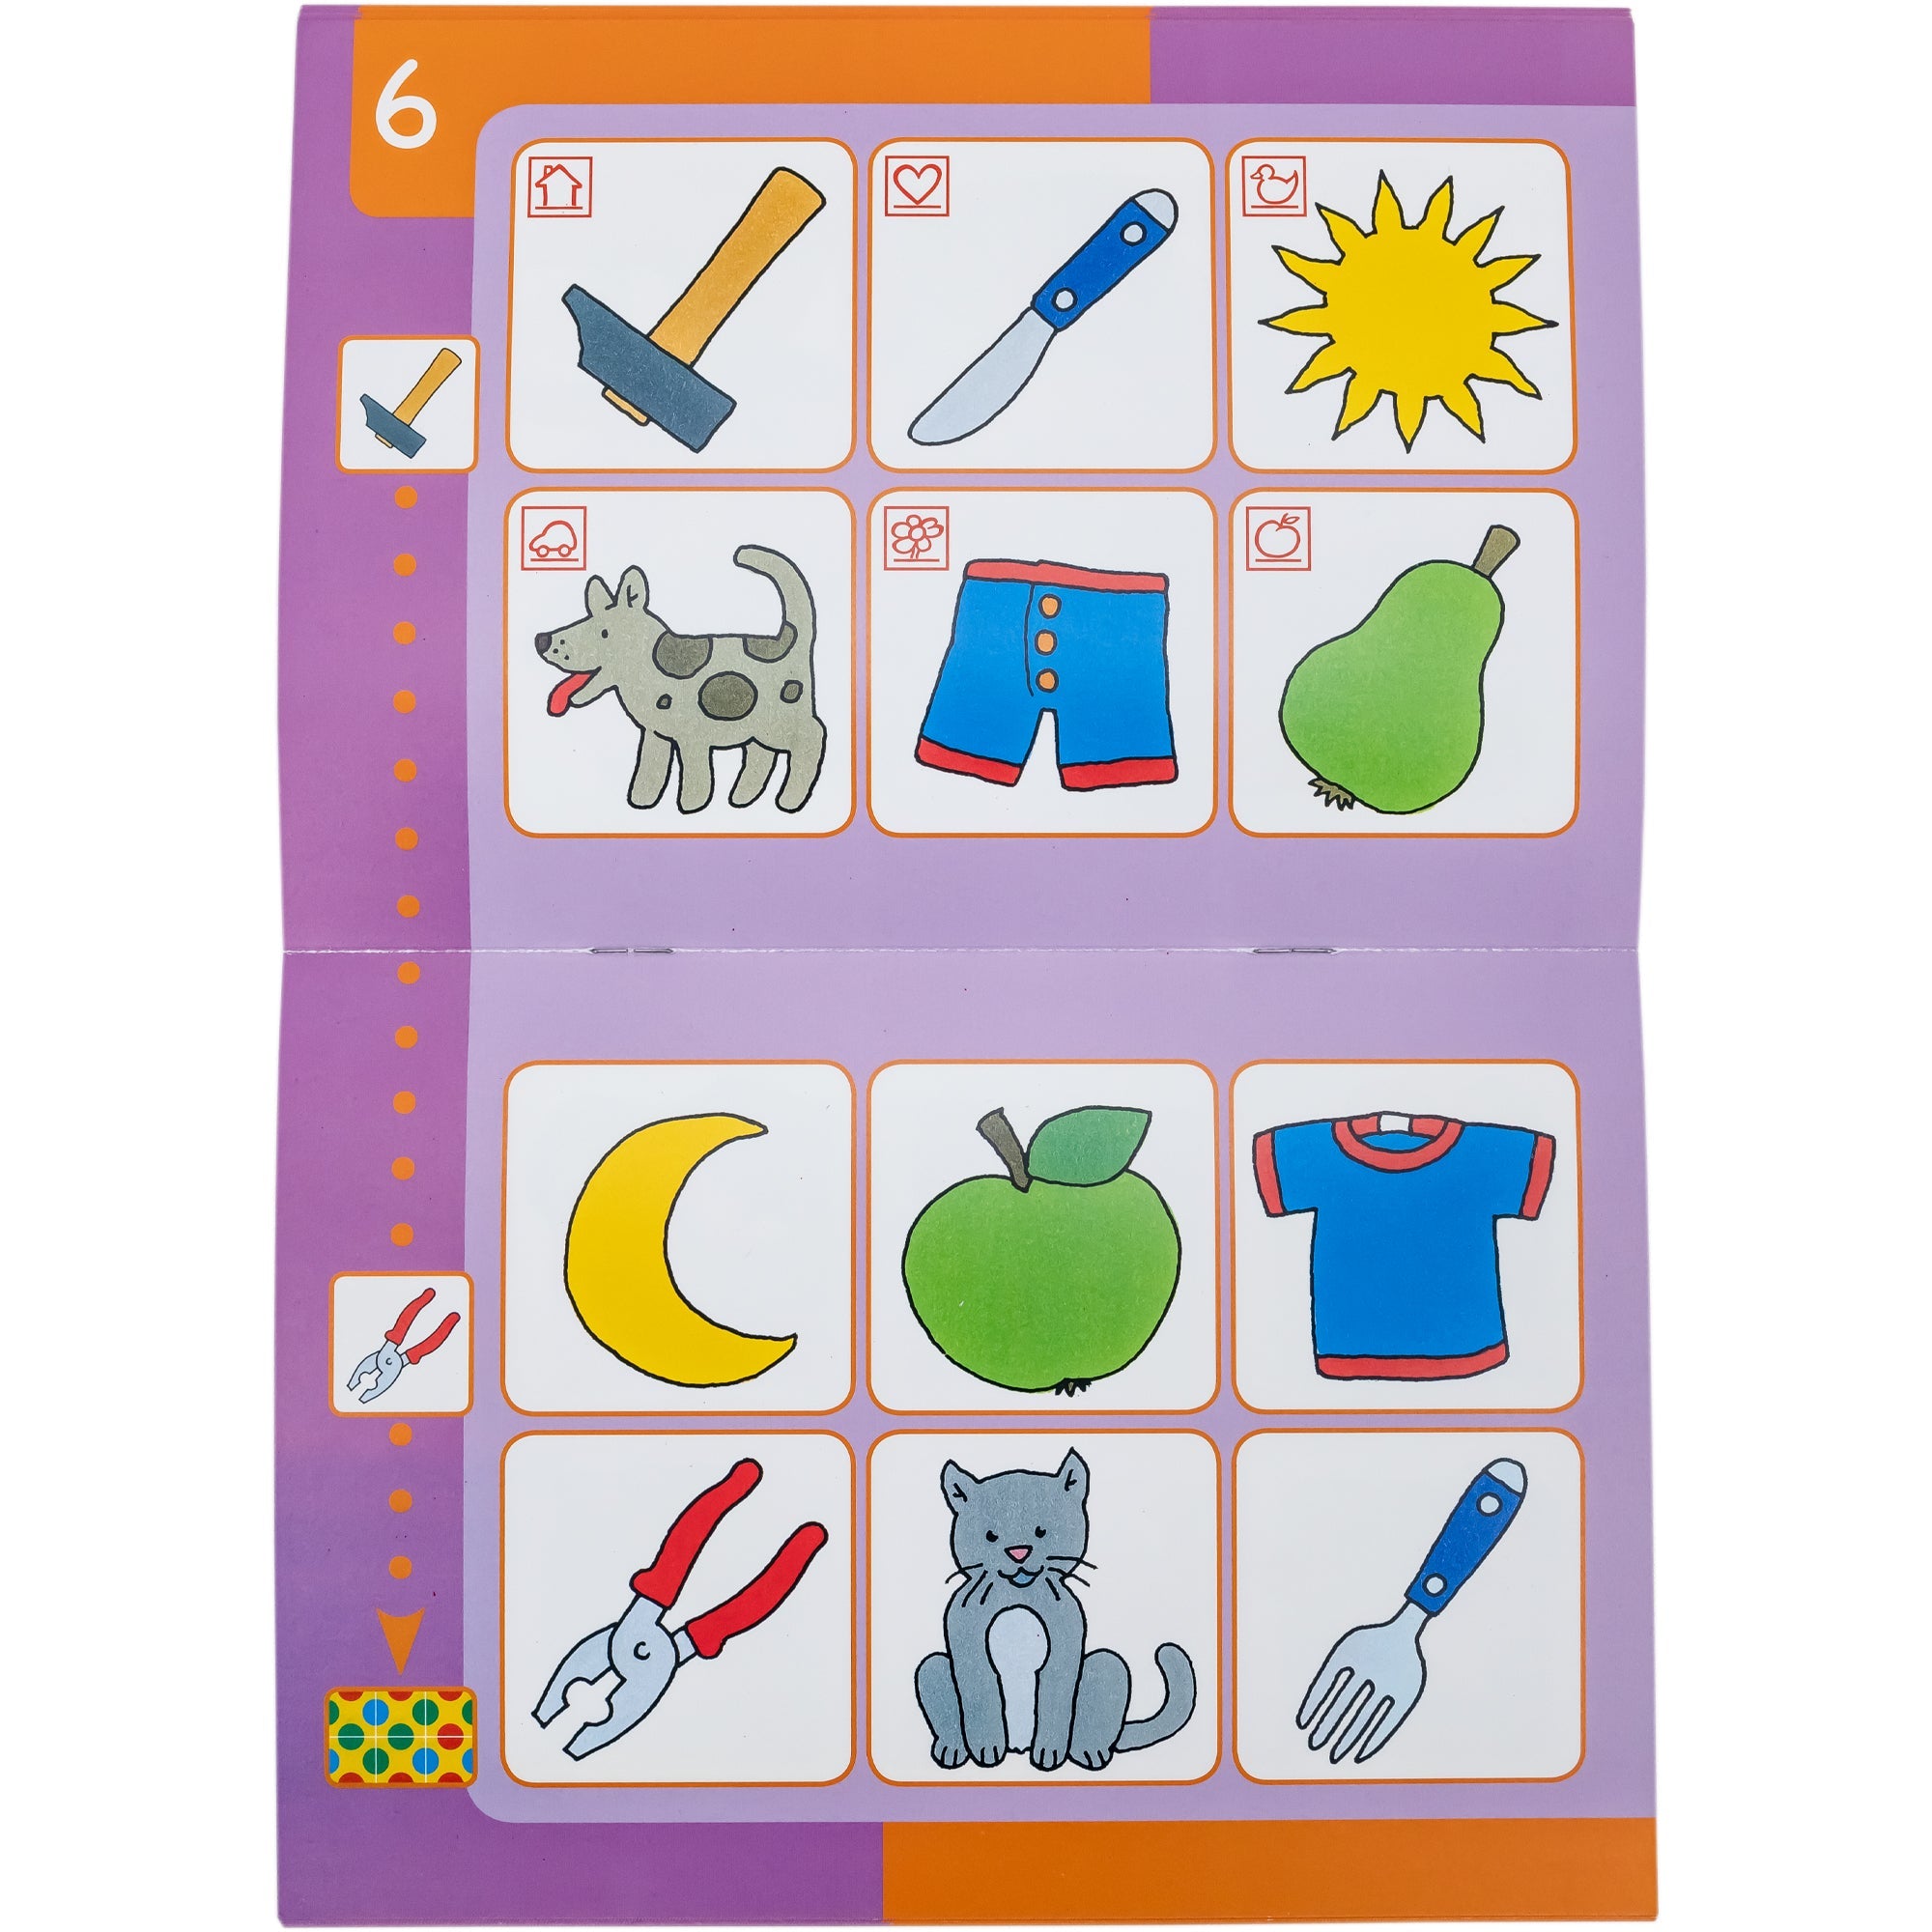 A Bambino L U K book open to show illustrations. The top portion shows 6 tile images of a mallet, knife, sun, dog, shorts, and pear. On the bottom page, it shows 6 tile images of a moon, apple, shirt, pliers, cat, and fork. The pages are purple, light purple, and orange.